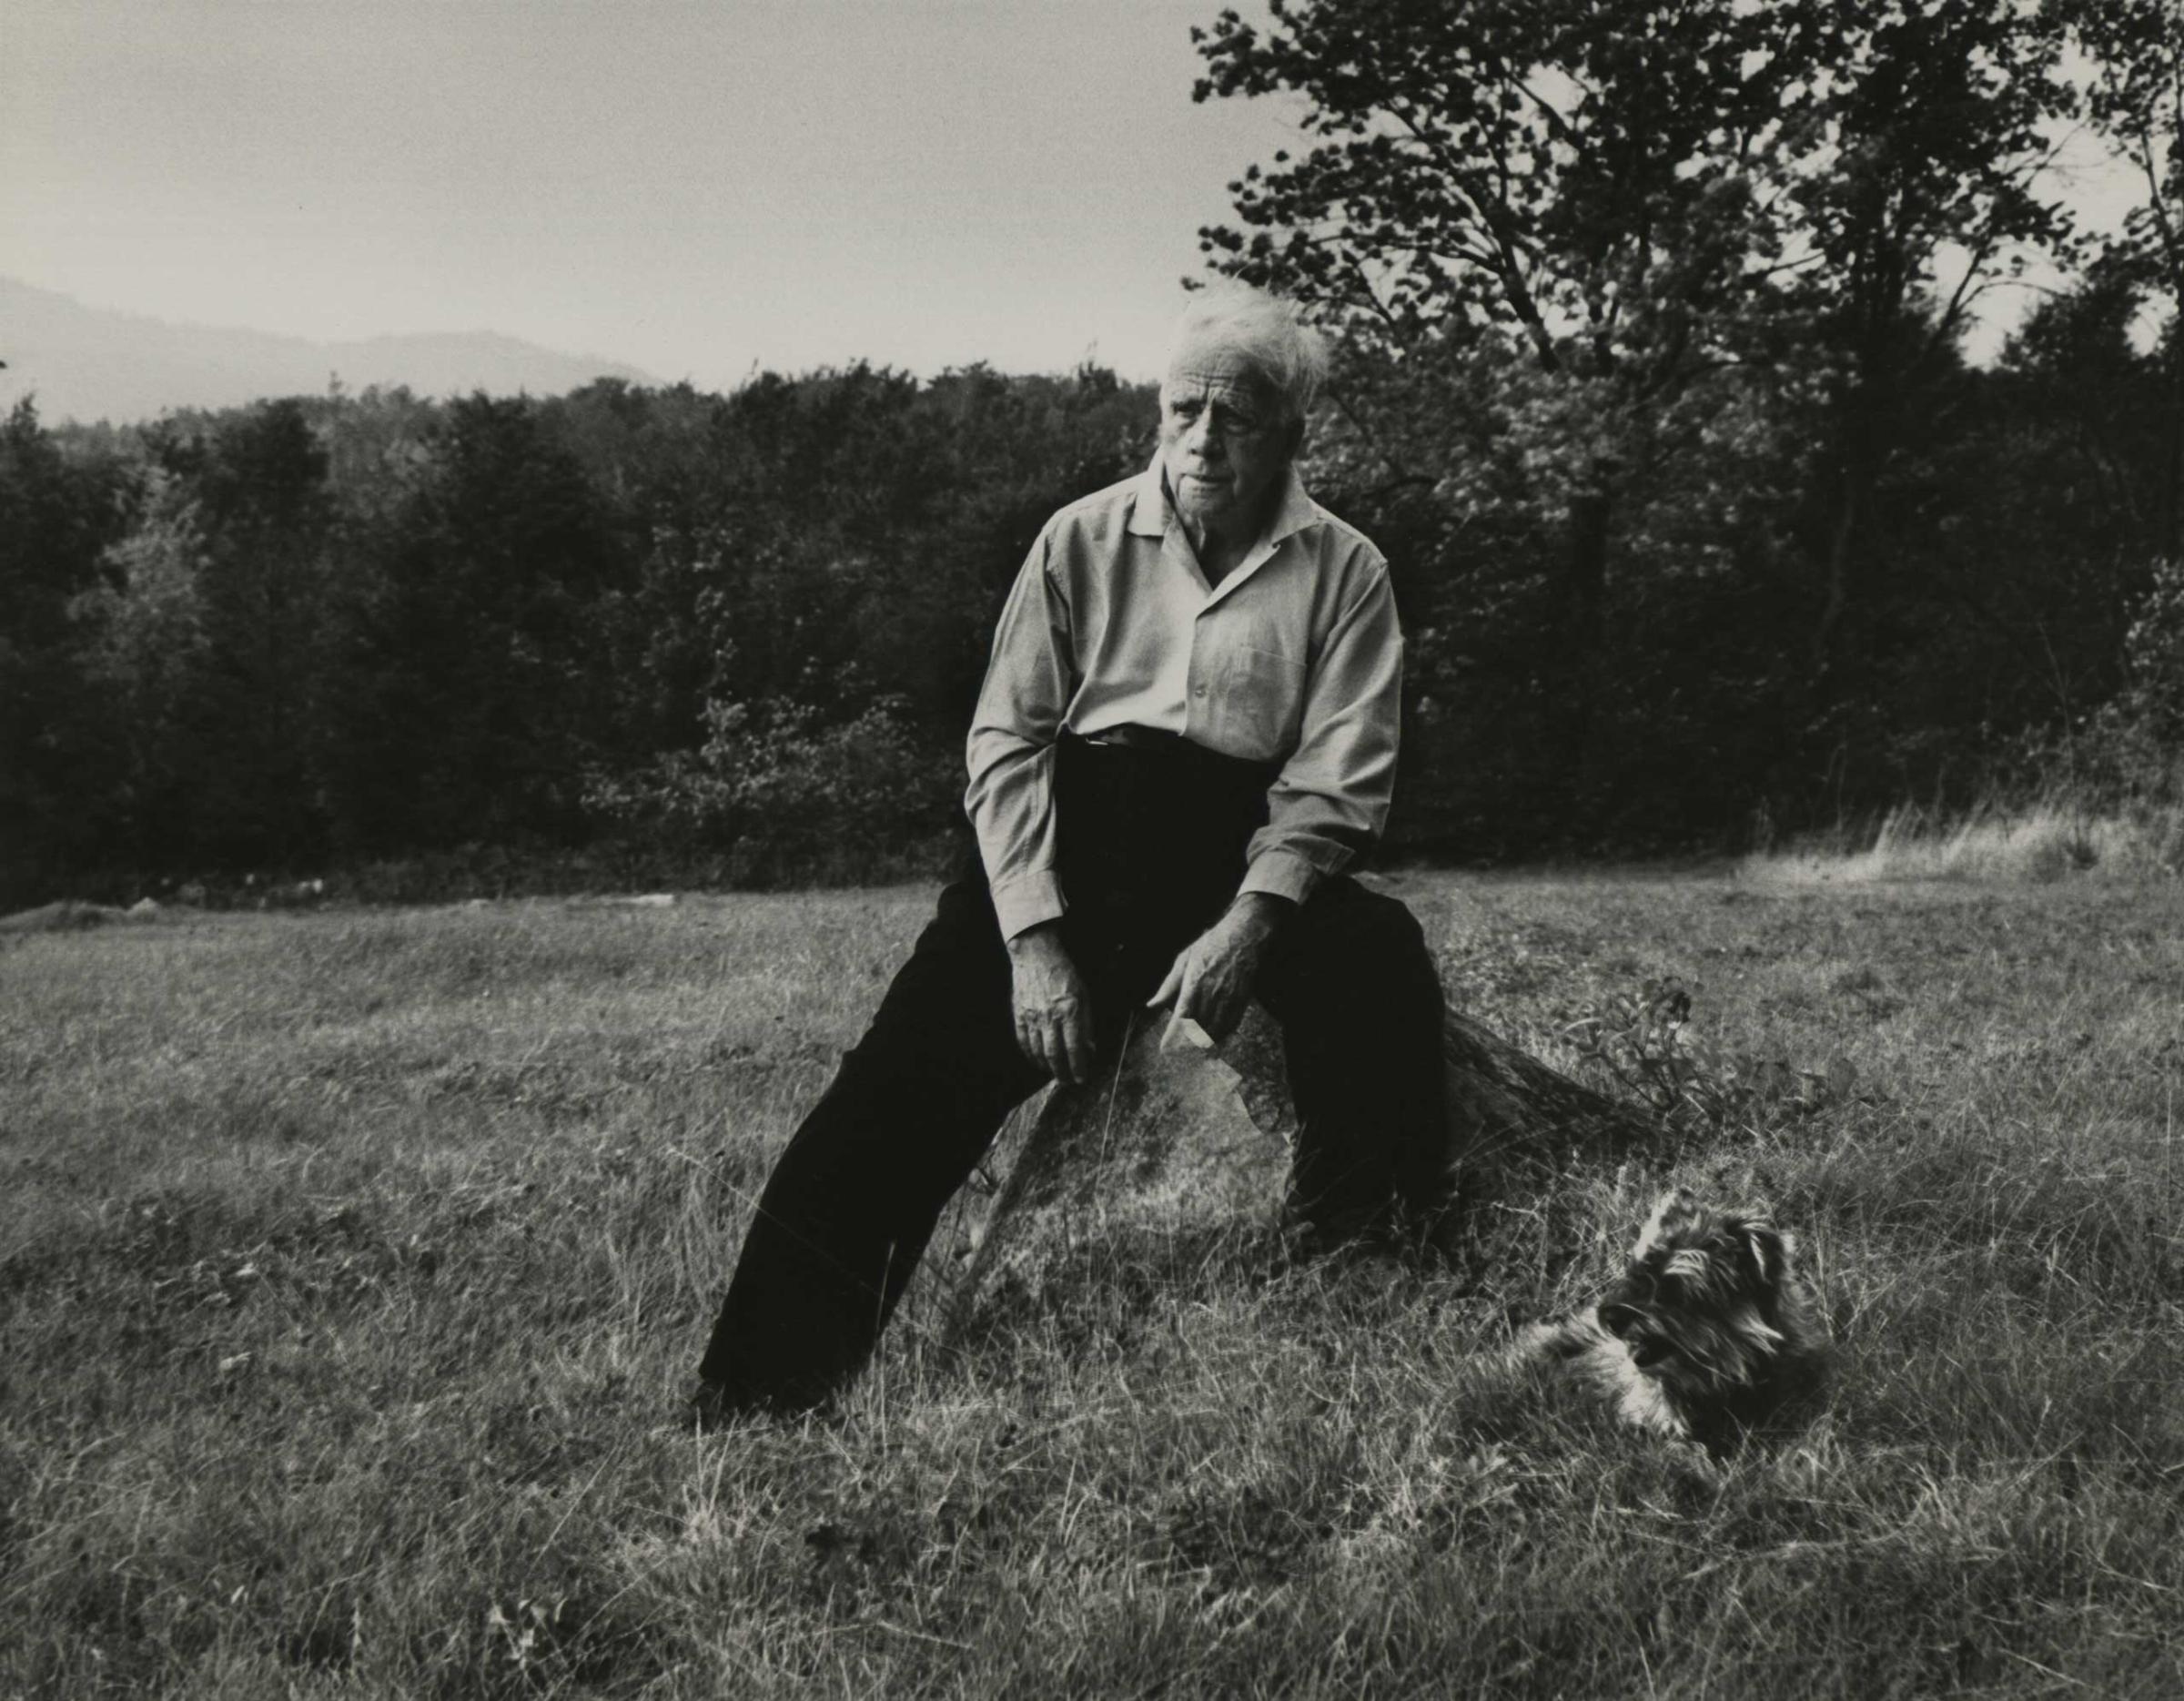 Robert Frost 84, poet. A late riser (9 to 10), he is active outdoors (gardening, walking), works late every night.